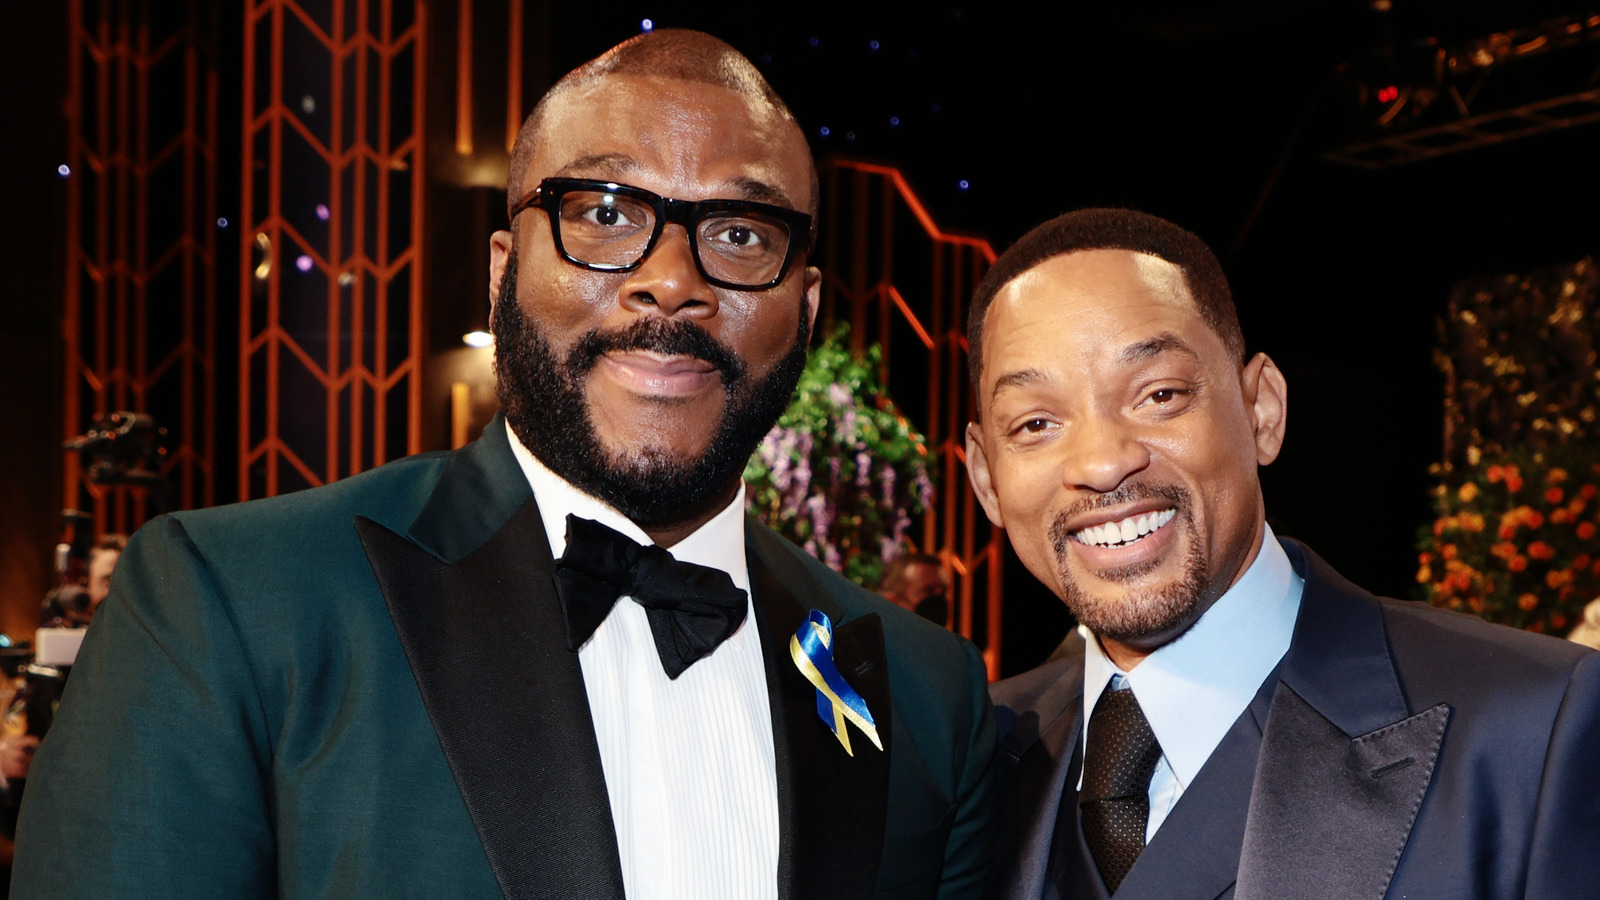 is tyler perry still friends with will smith after the oscars slap